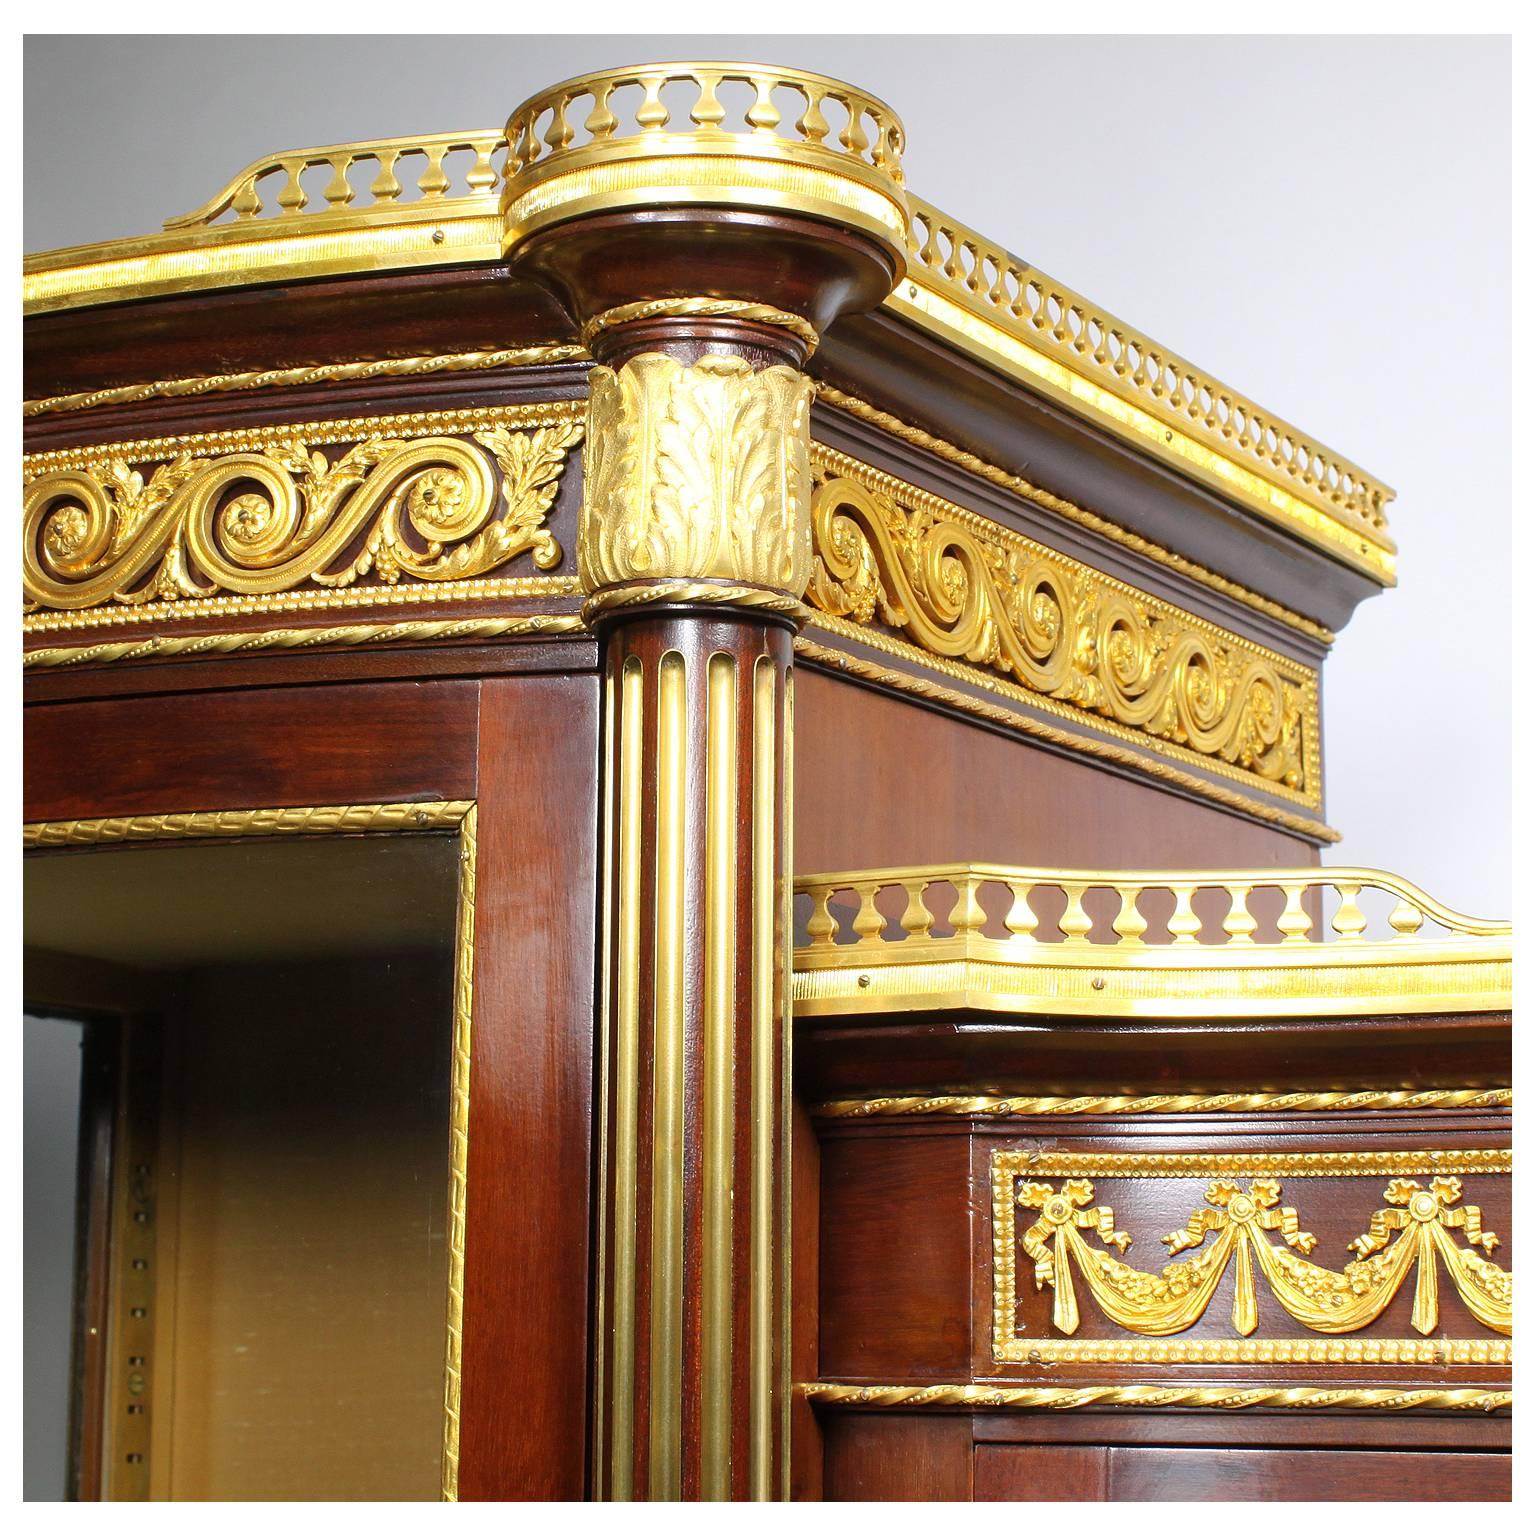 French 19th-20th Century Louis XVI Style Mahogany and Ormolu-Mounted Vitrine For Sale 2